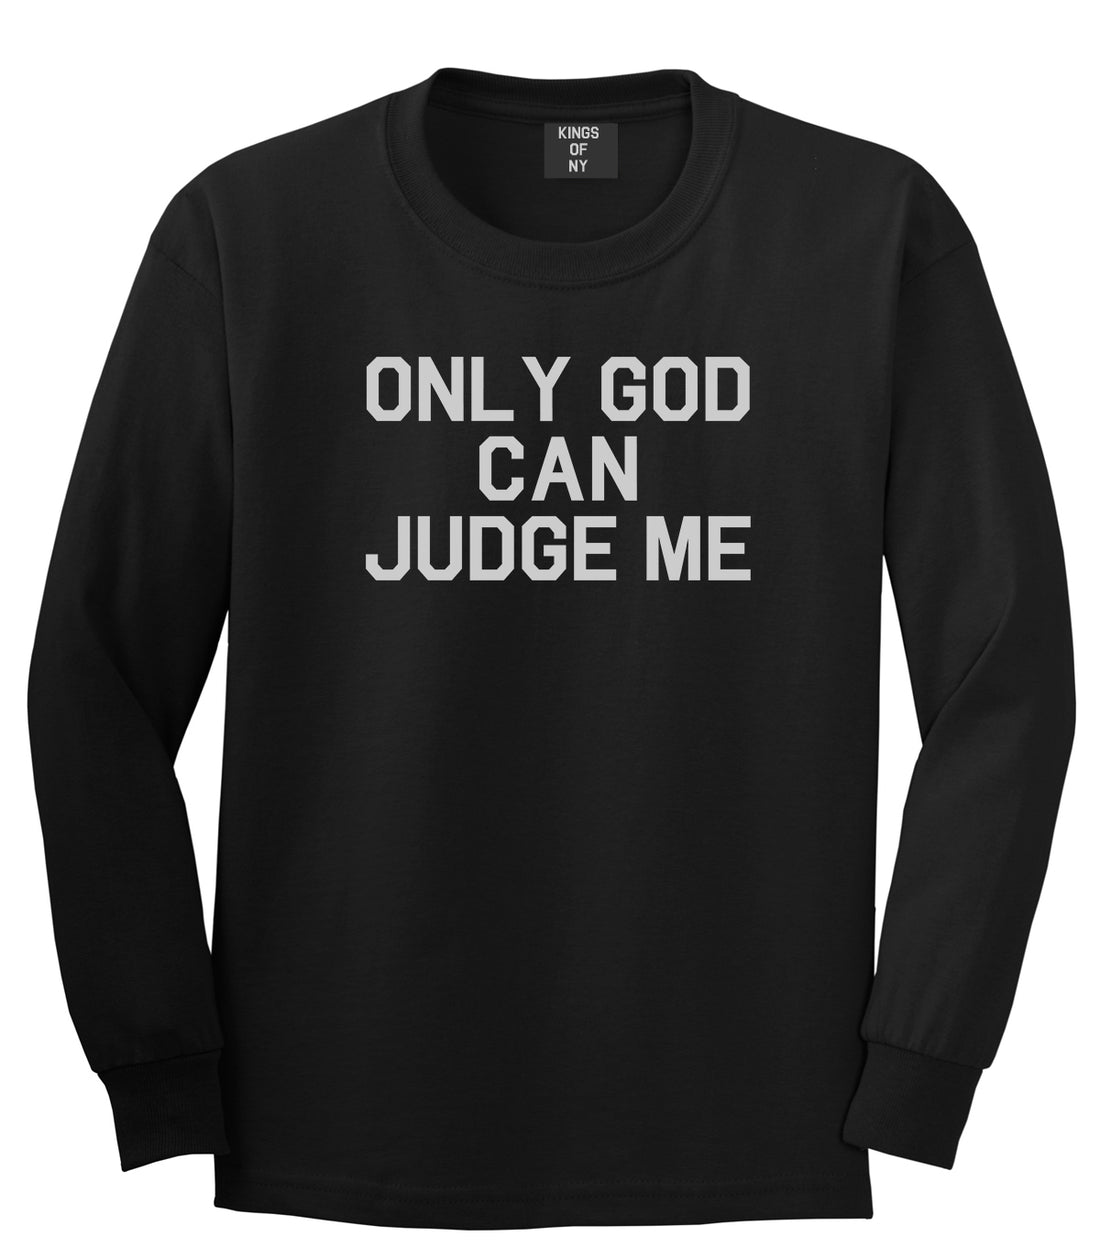 Only God Can Judge Me Mens Long Sleeve T-Shirt Black by Kings Of NY